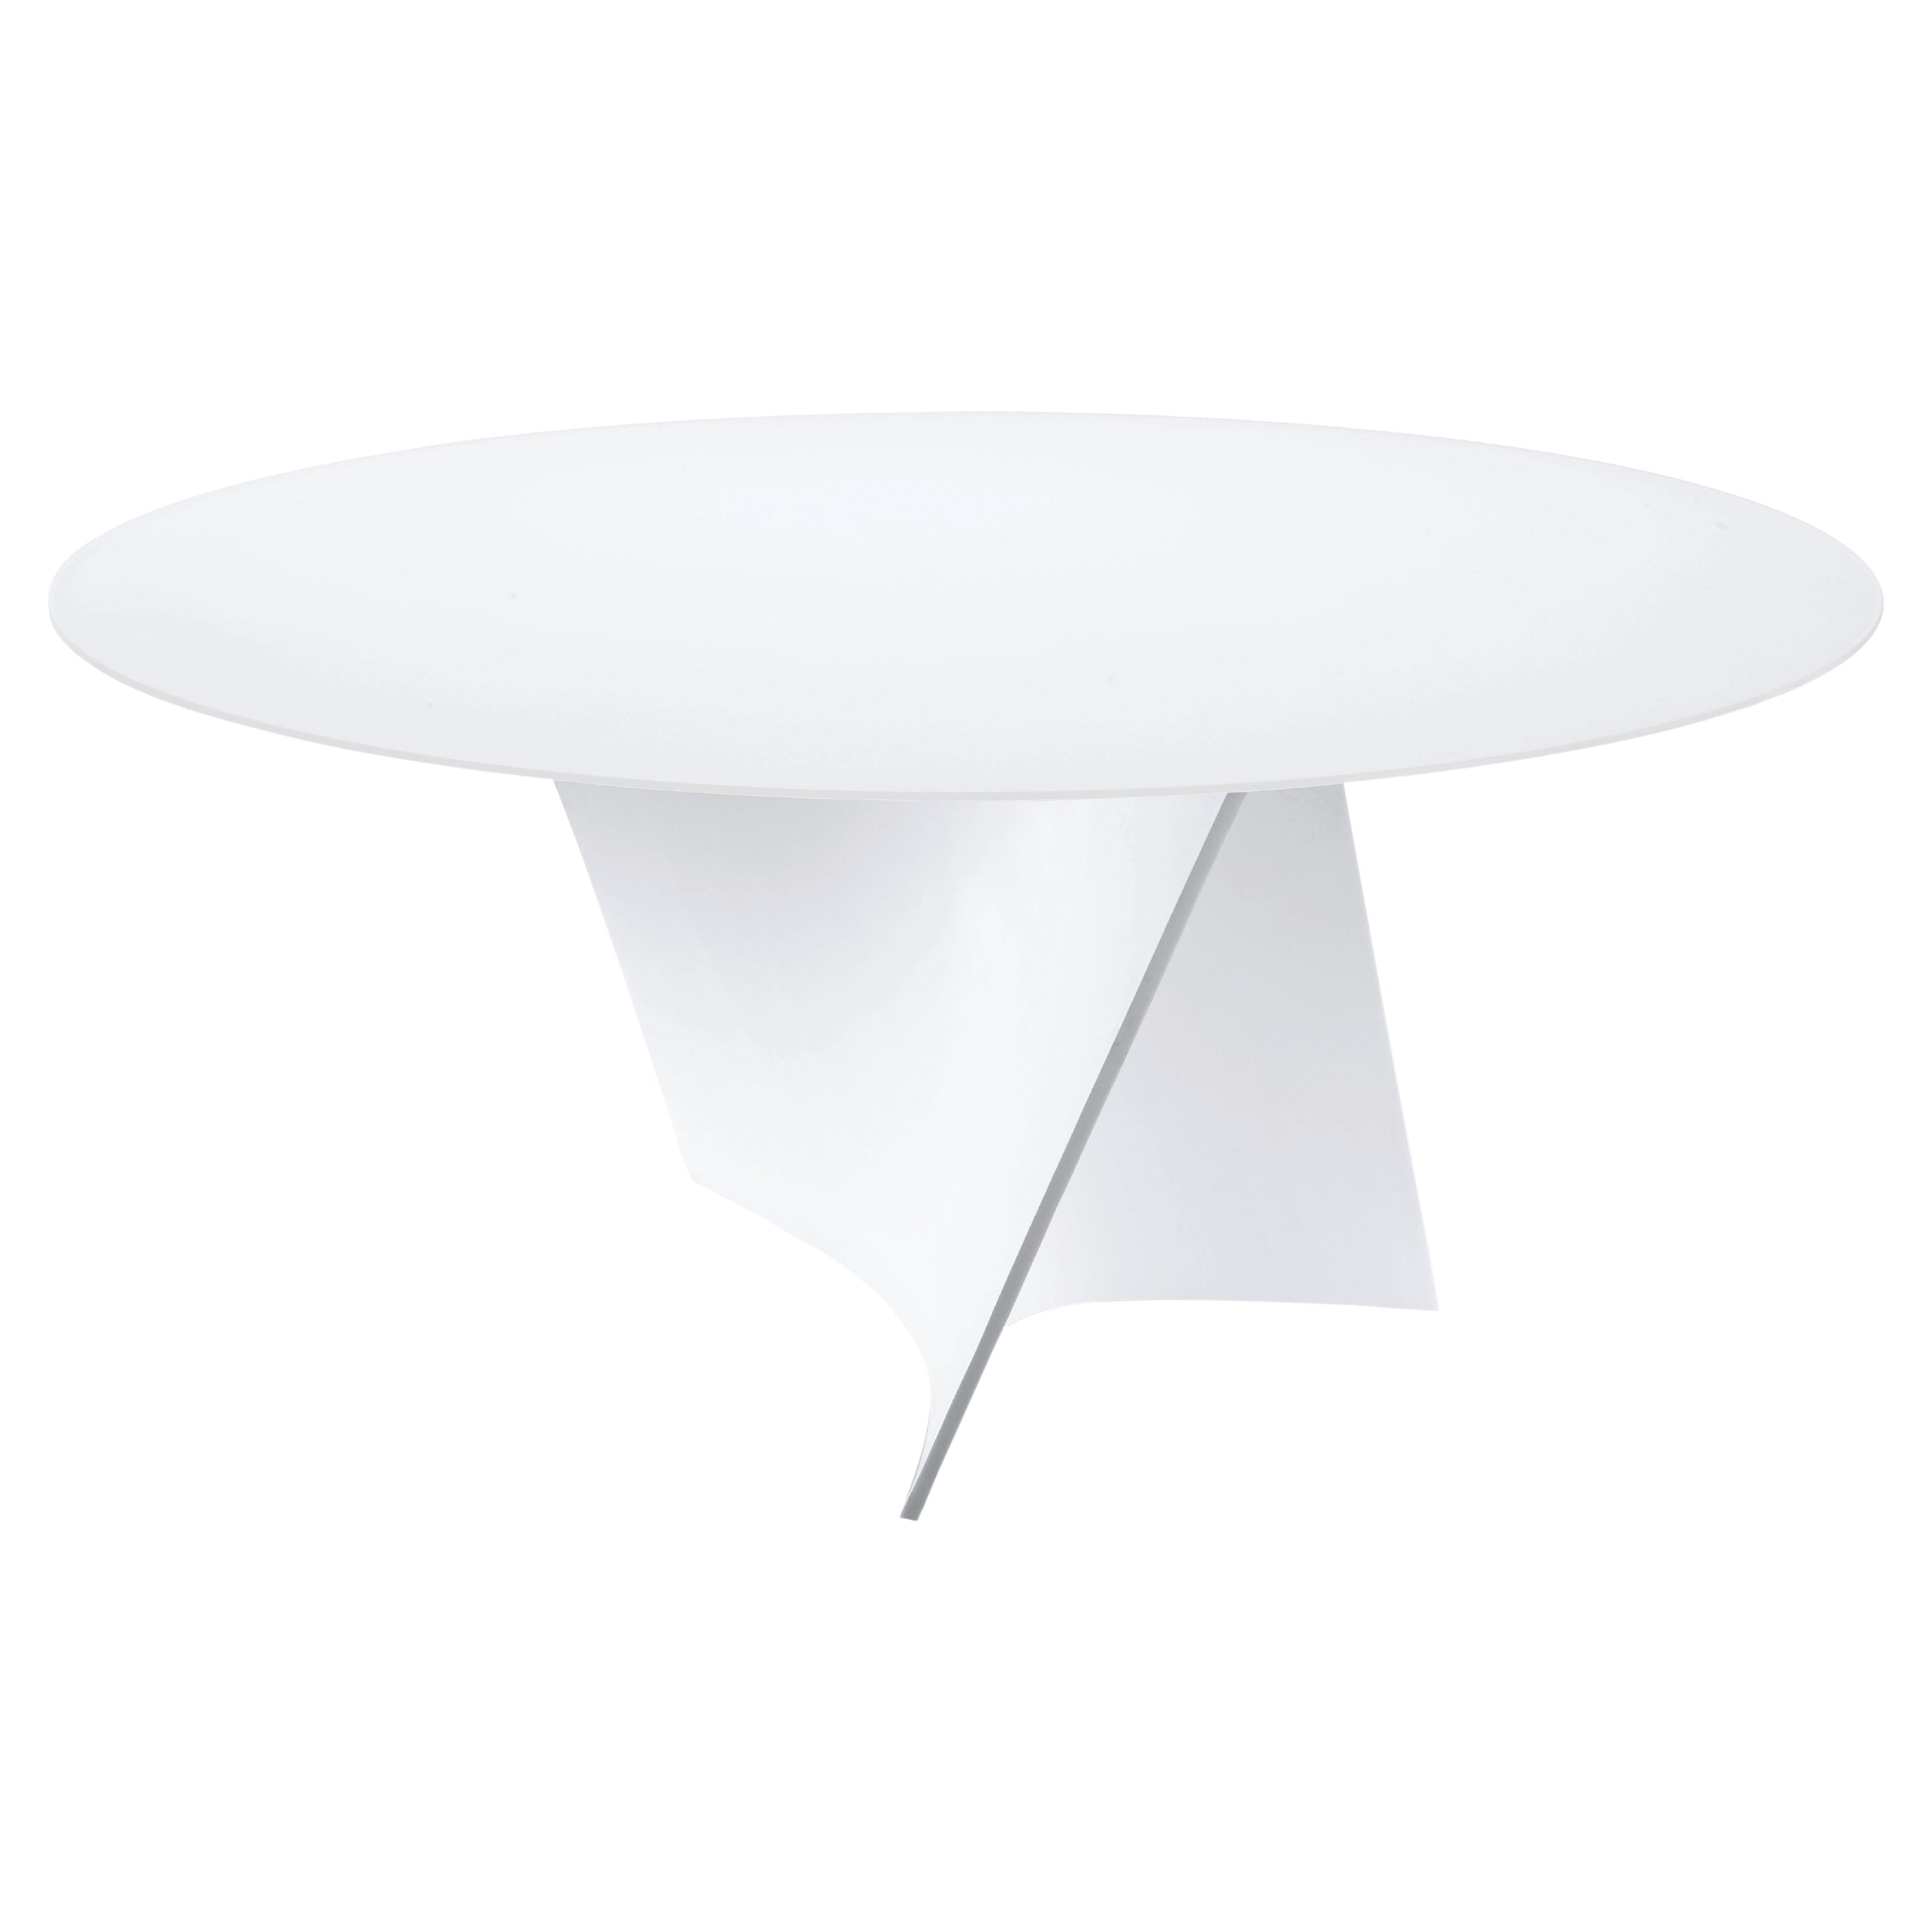 Zanotta Large Elica Table in White Plate Glass Top & White Frame